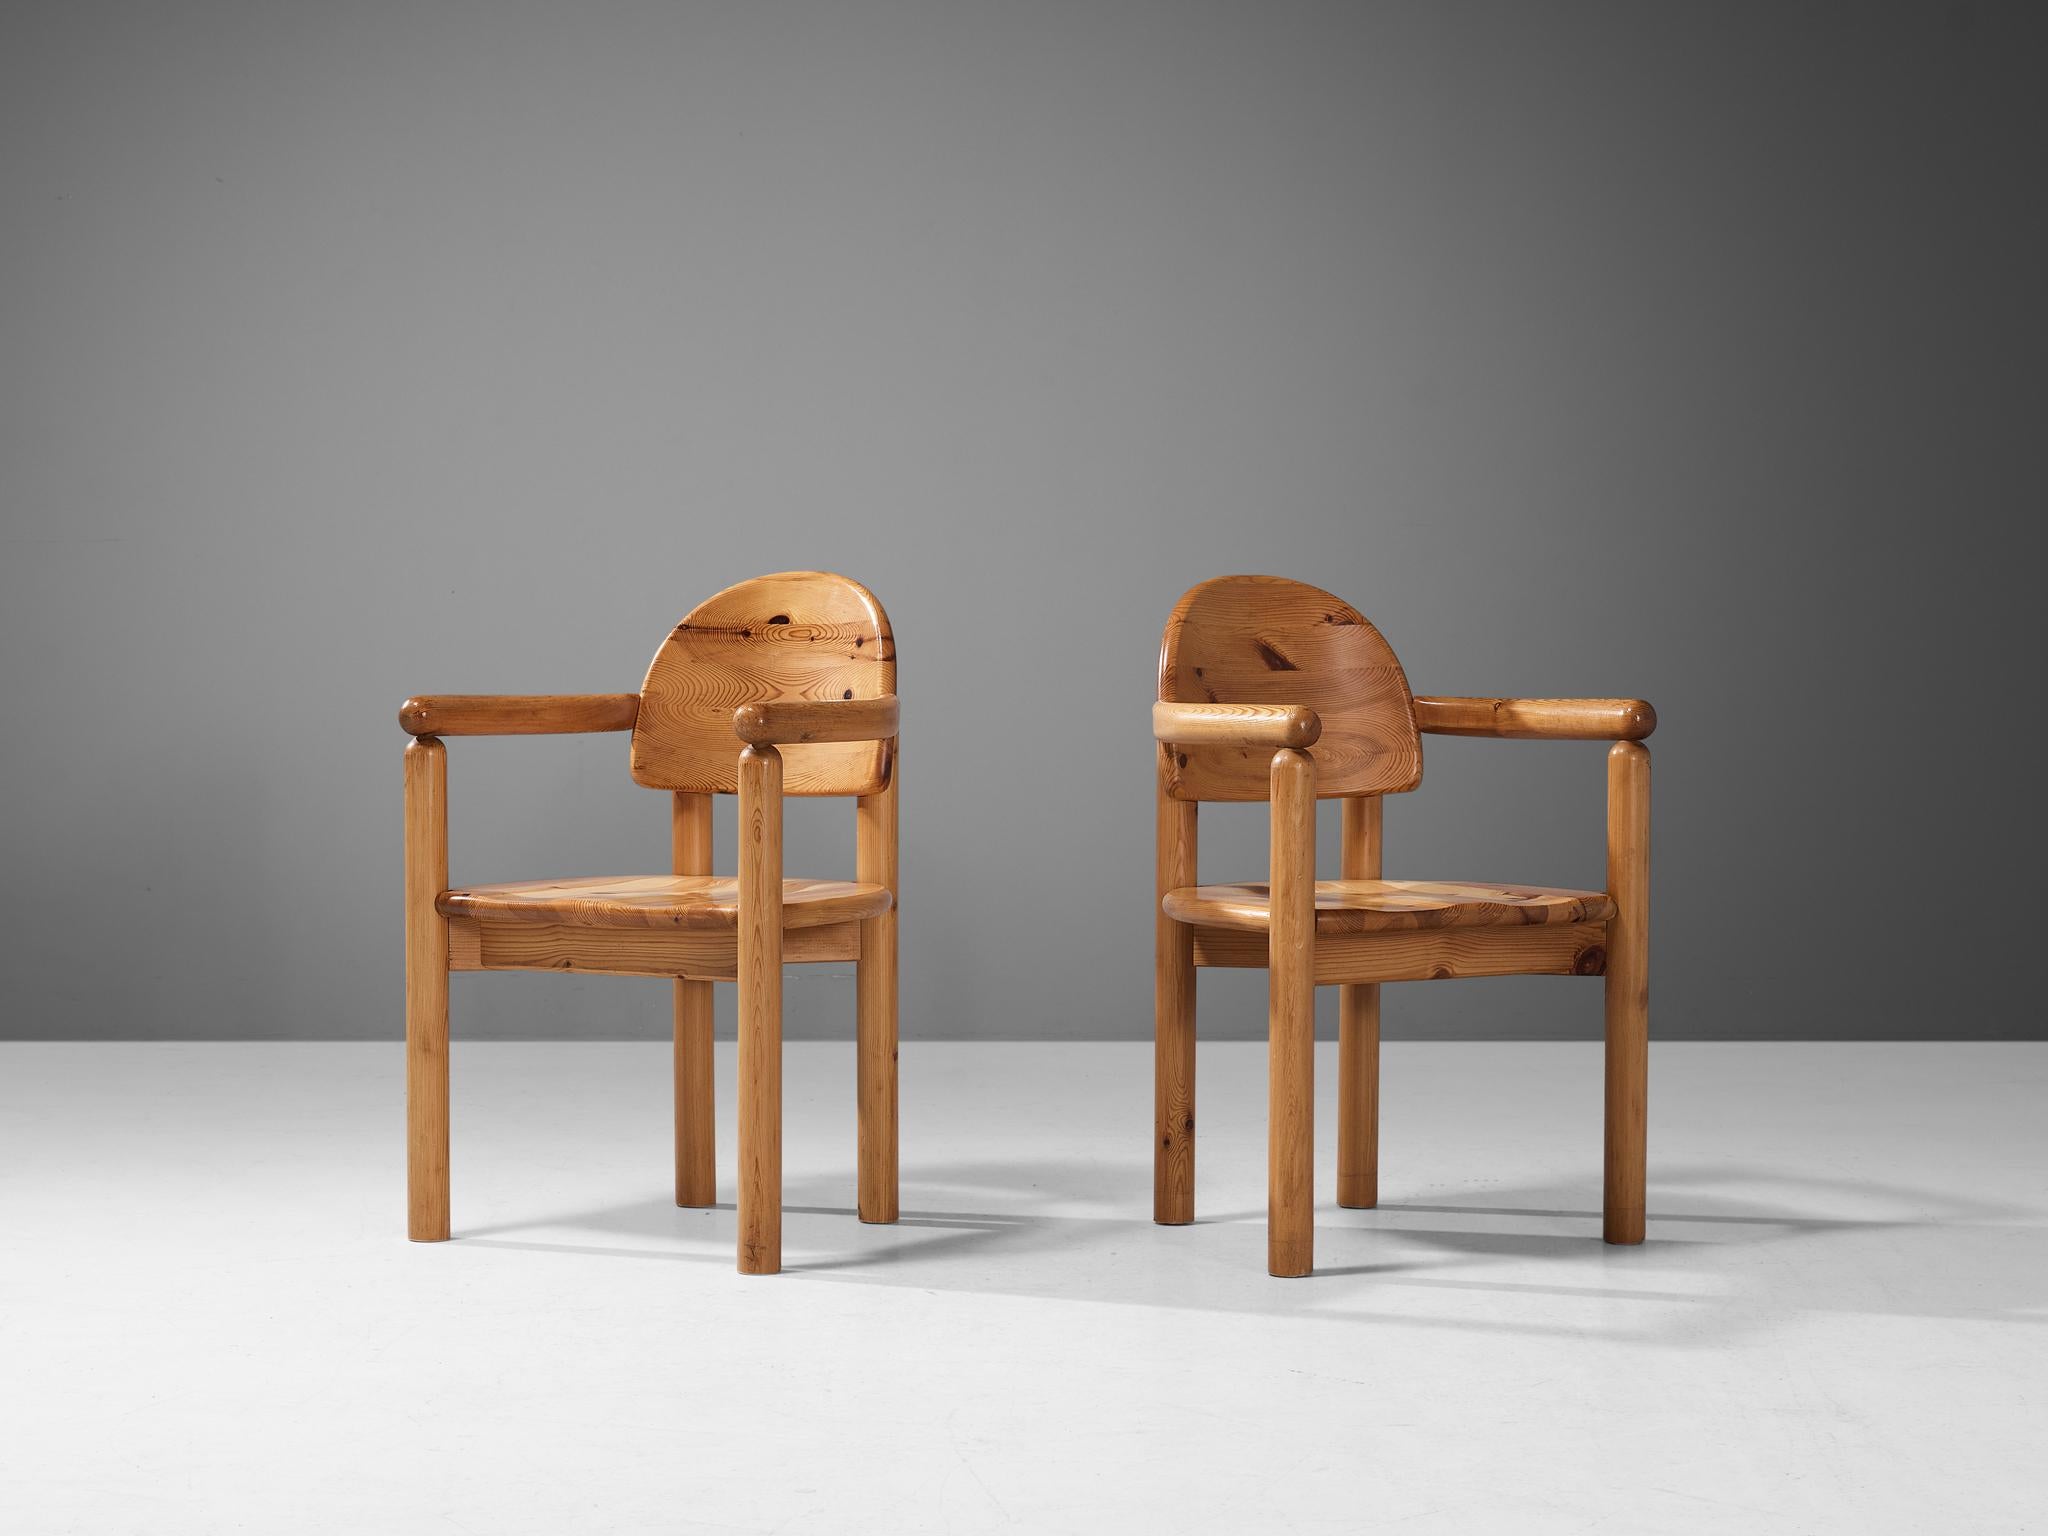 Rainer Daumiller for Hirtshals Savvaerk, pair of armchairs, pine, Denmark, 1970s.
 
This pair of armchairs by Danish designer Rainer Daumiller has multiple features. The vivid grain of the warm pine wood contributes to the natural expressiveness of